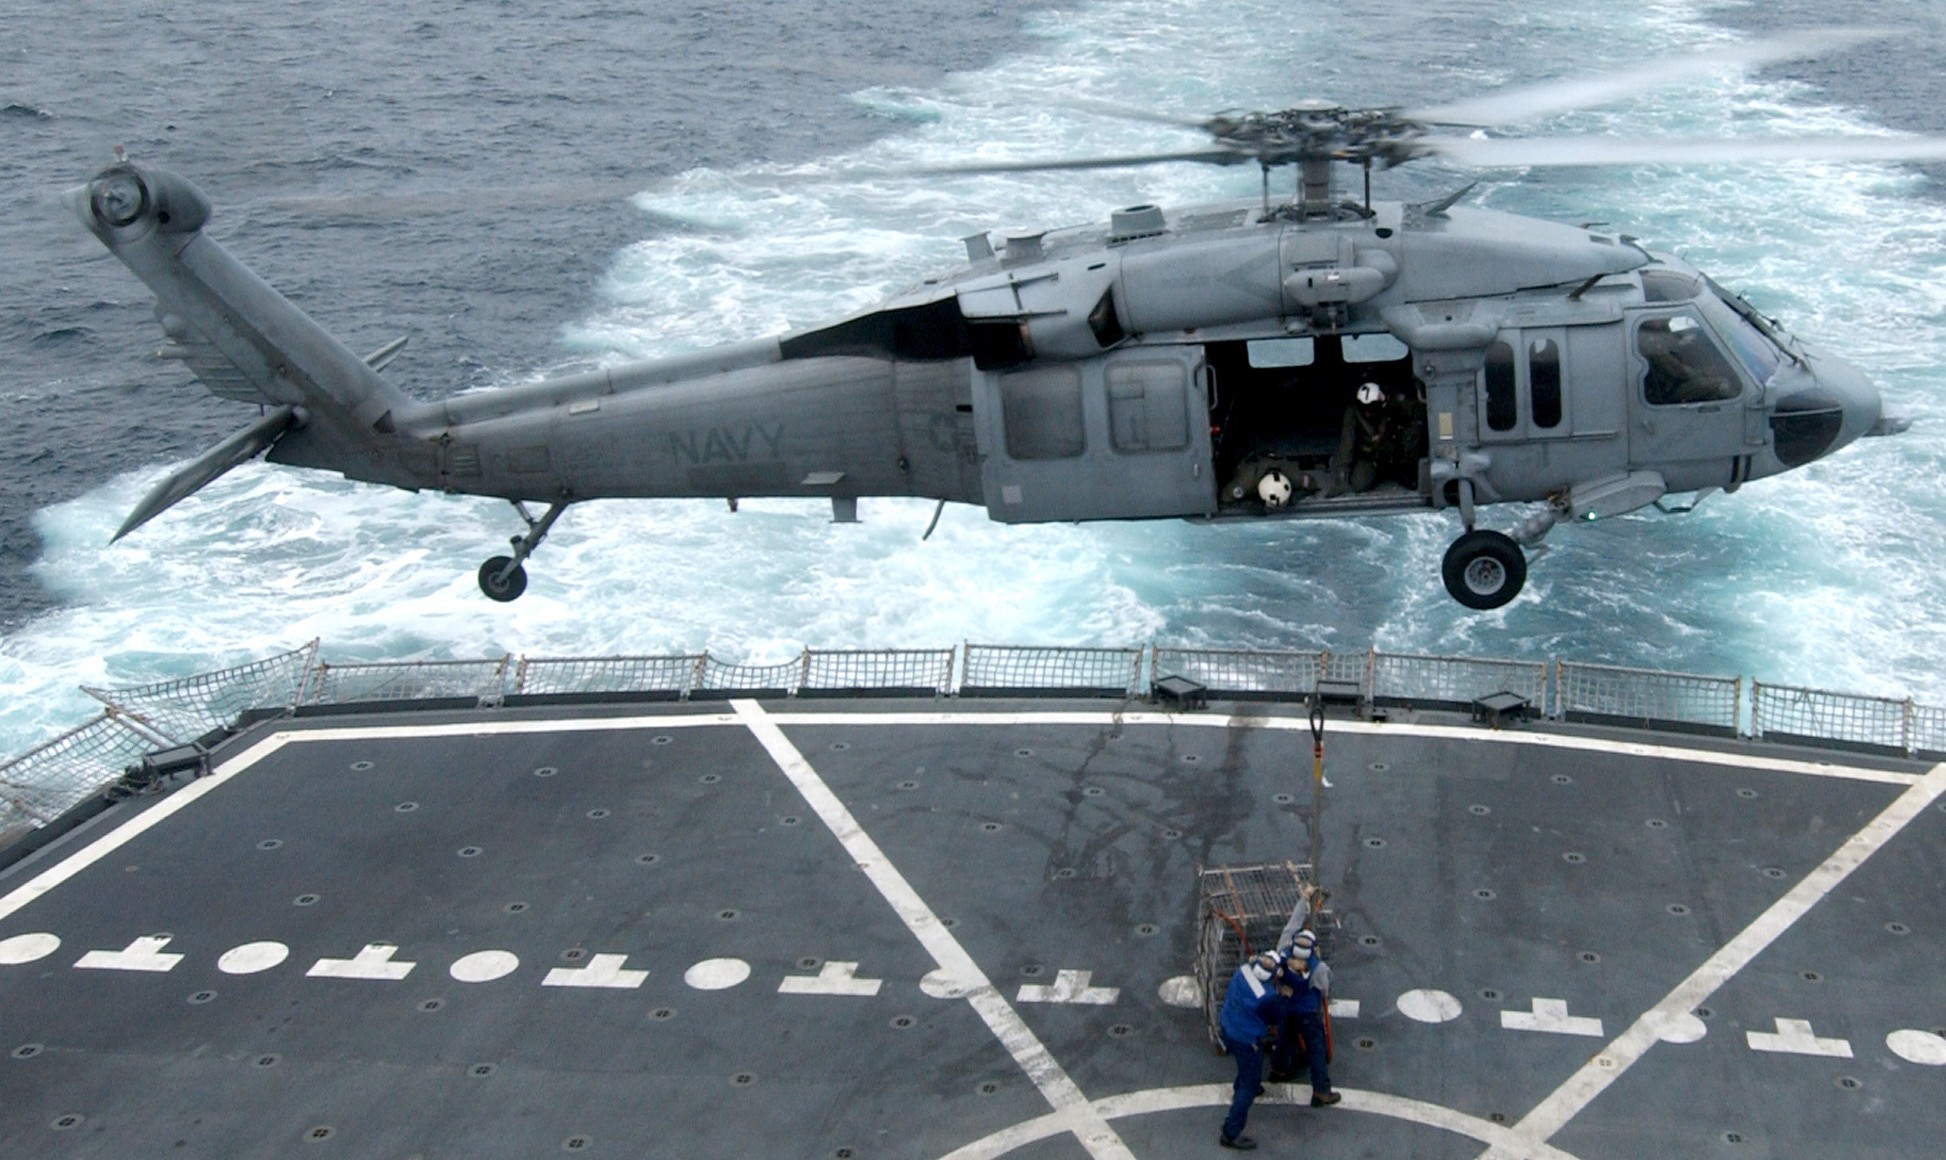 hsc-3 merlins helicopter sea combat squadron mh-60s seahawk us navy 2005 18